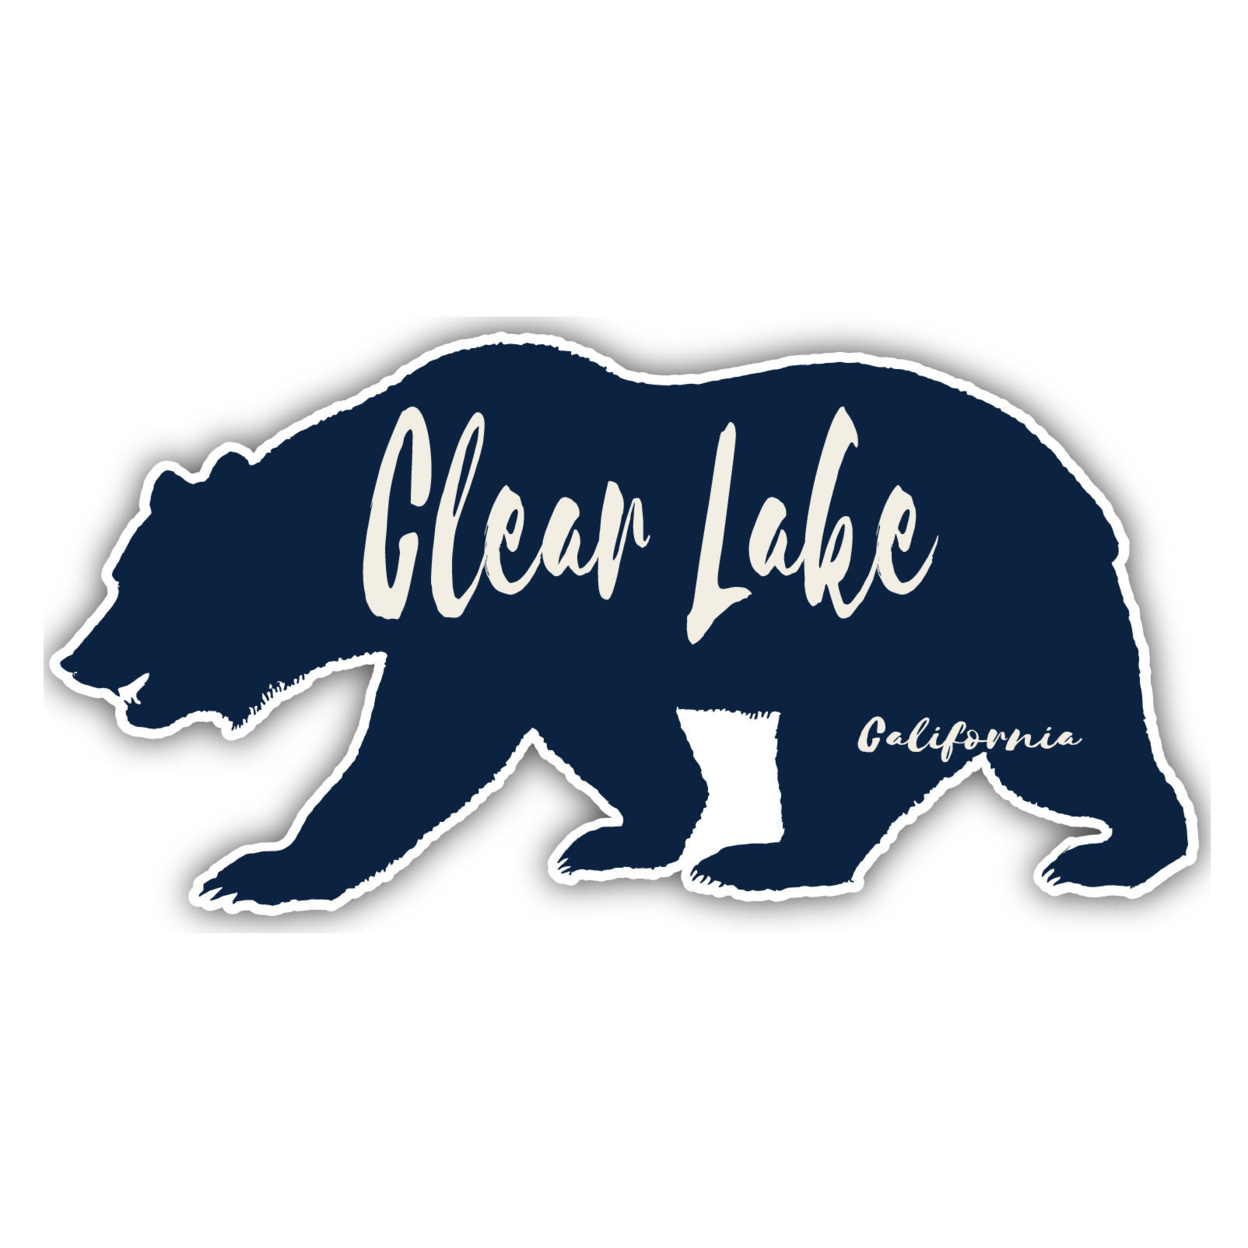 Clear Lake California Souvenir Decorative Stickers (Choose Theme And Size) - 4-Pack, 10-Inch, Bear